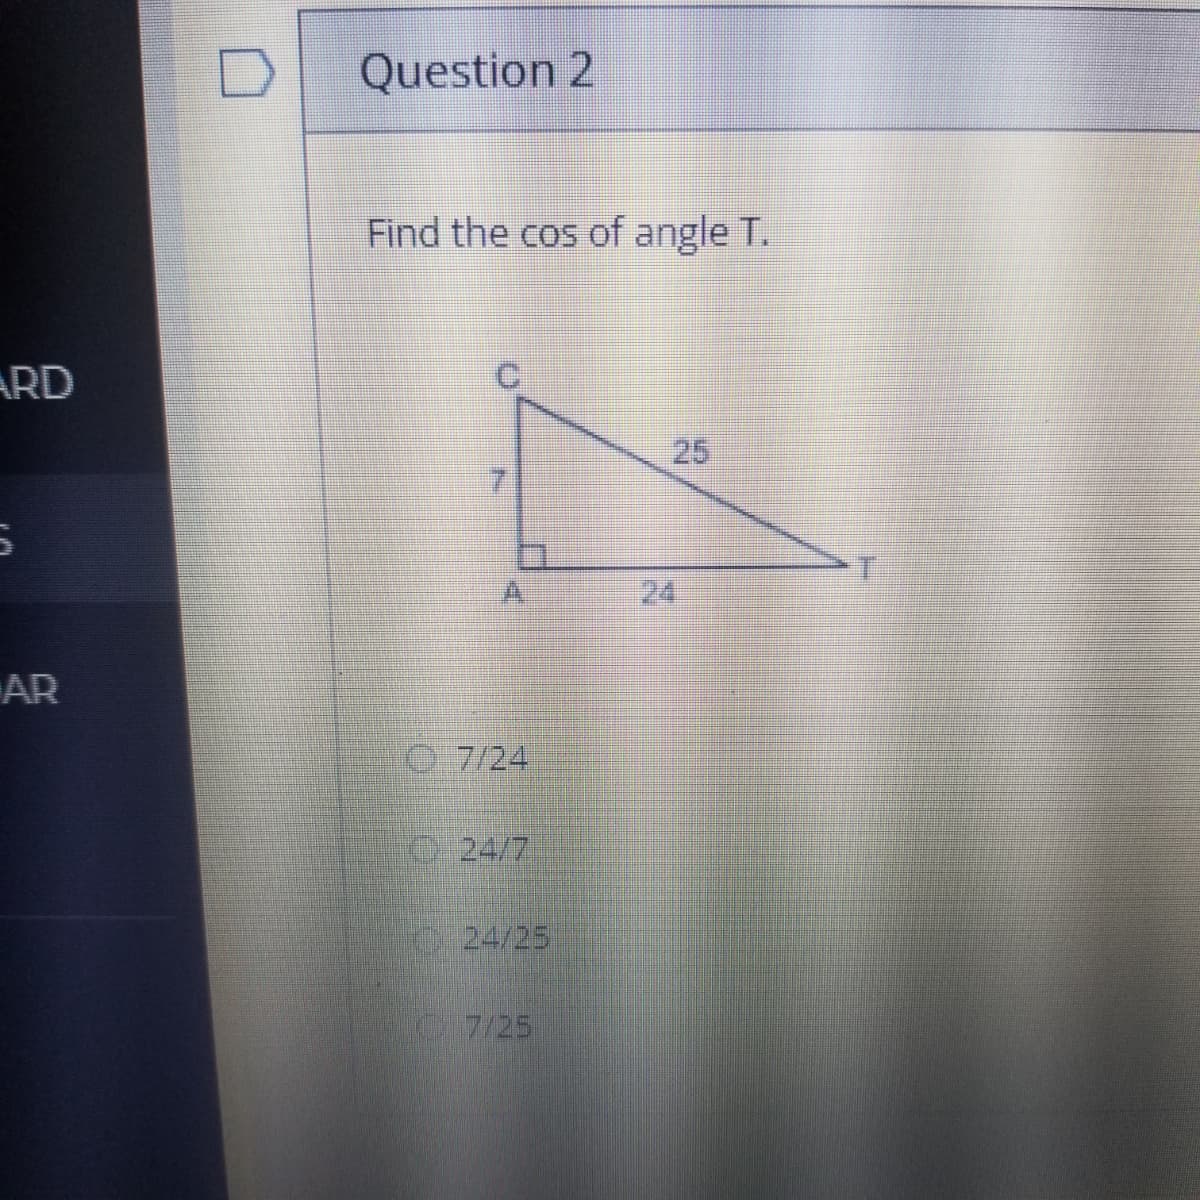 Question 2
Find the cos of angle T.
ARD
25
24
AR
O 7/24
O24/7
024/25
C7/25
